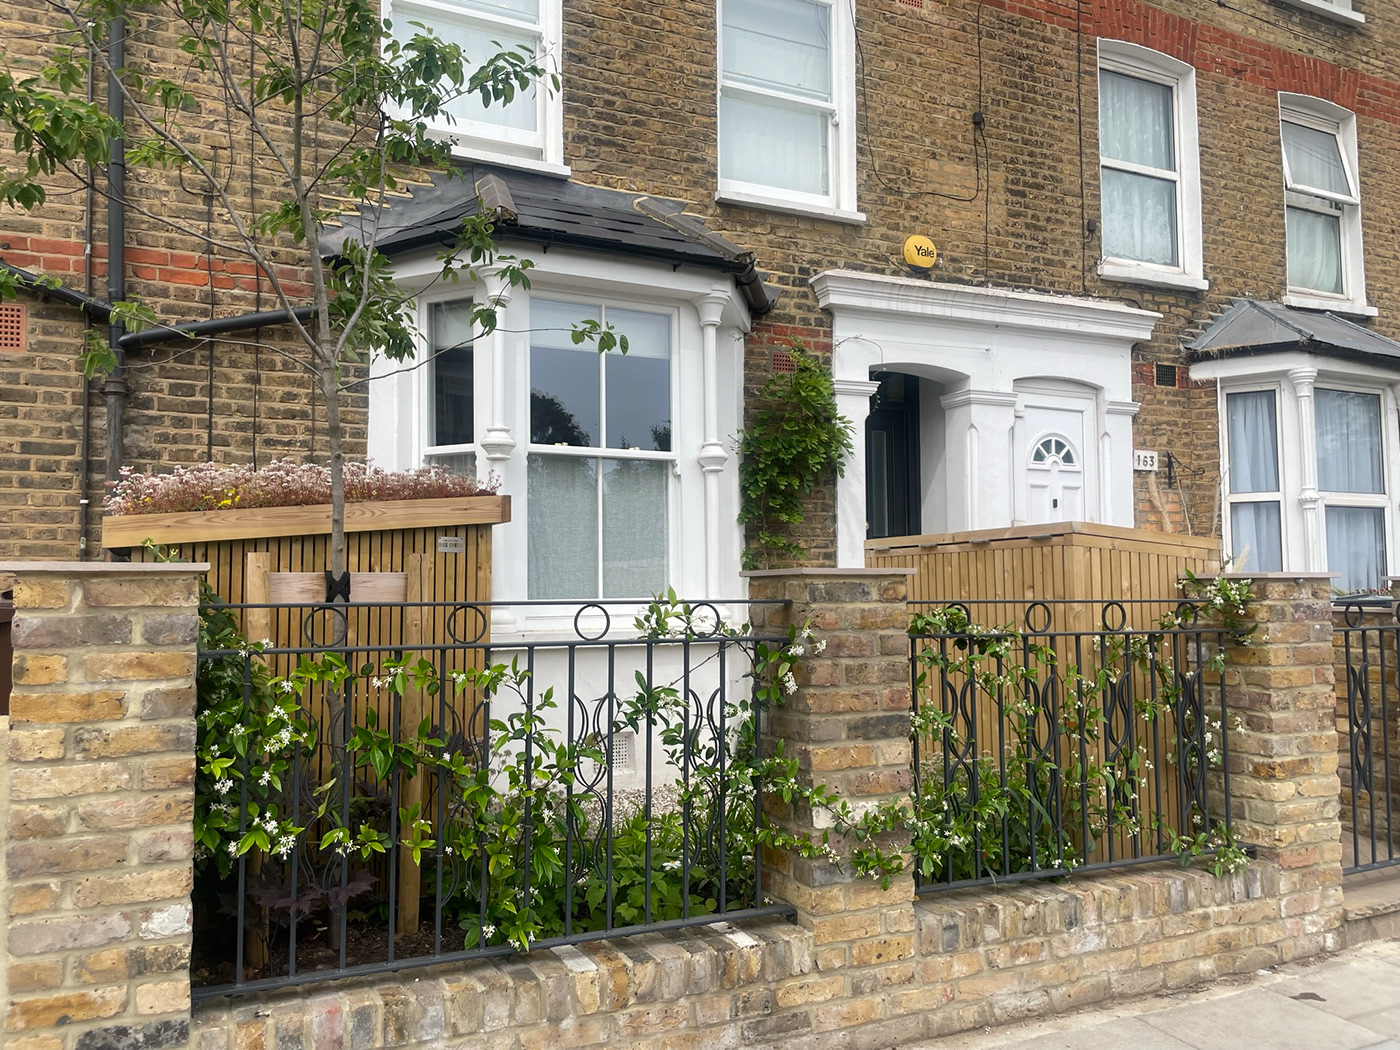 The kerb appeal of this East London Victorian terrace has been improved with practical storage 